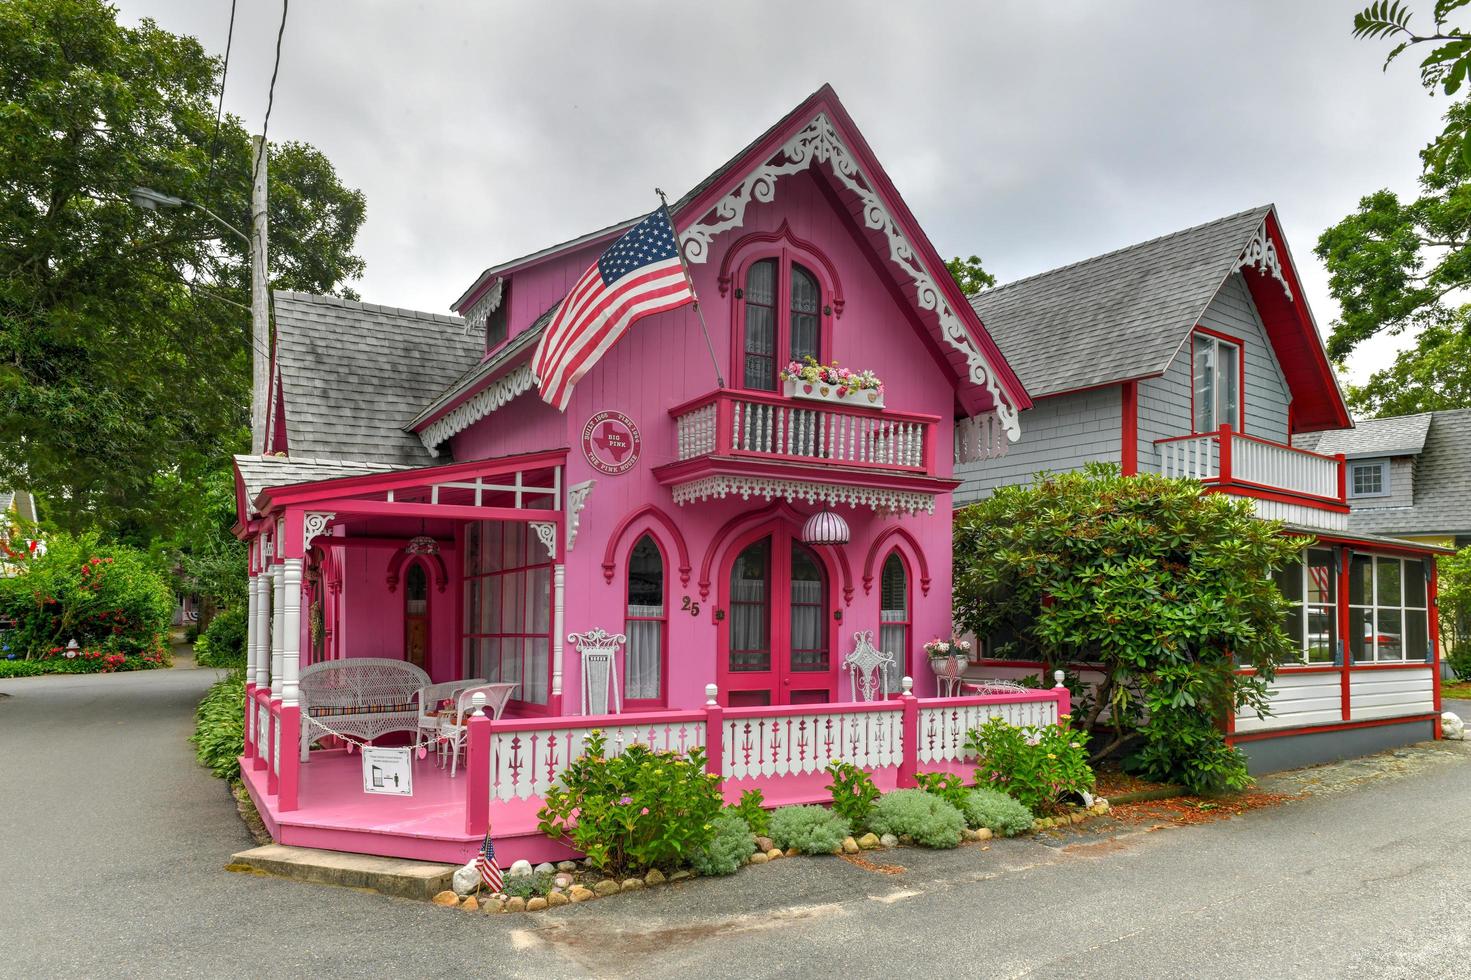 Martha's Vineyard, MA - July 5, 2020 -   Carpenter Gothic Cottages with Victorian style, gingerbread trim in Oak Bluffs on Martha's Vineyard, Massachusetts, USA. photo